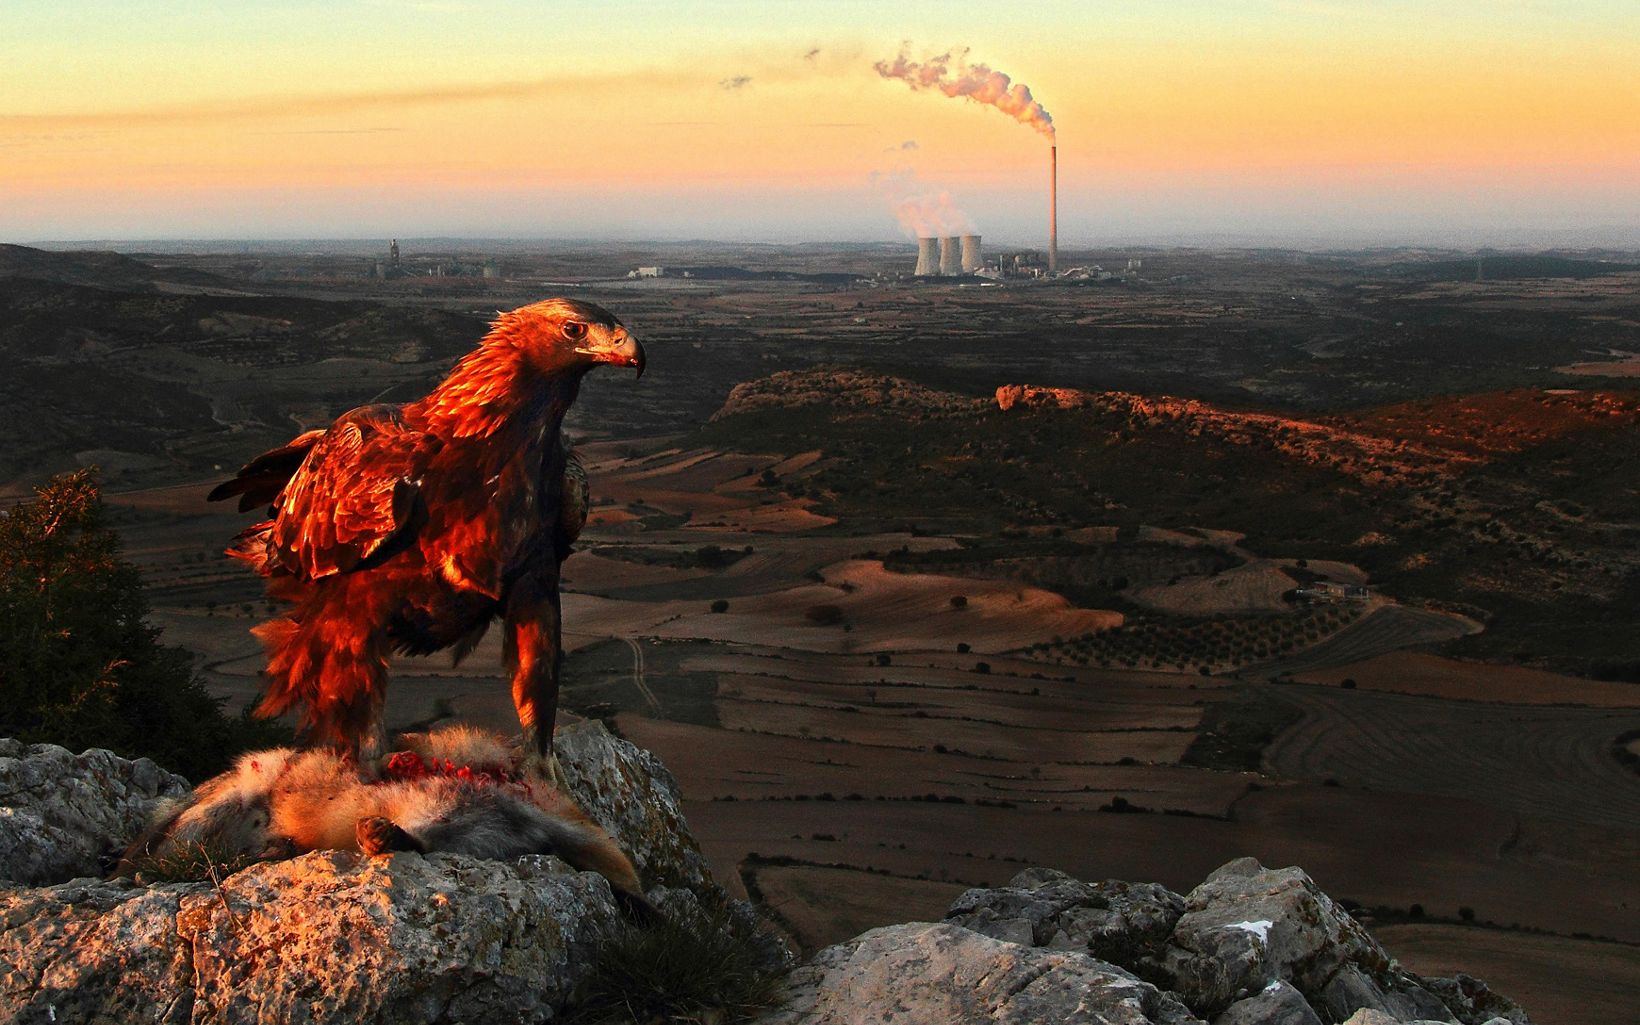 A male golden eagle feeds on a red fox. Behind stands the Andorra thermal power station (Aragon, Spain)